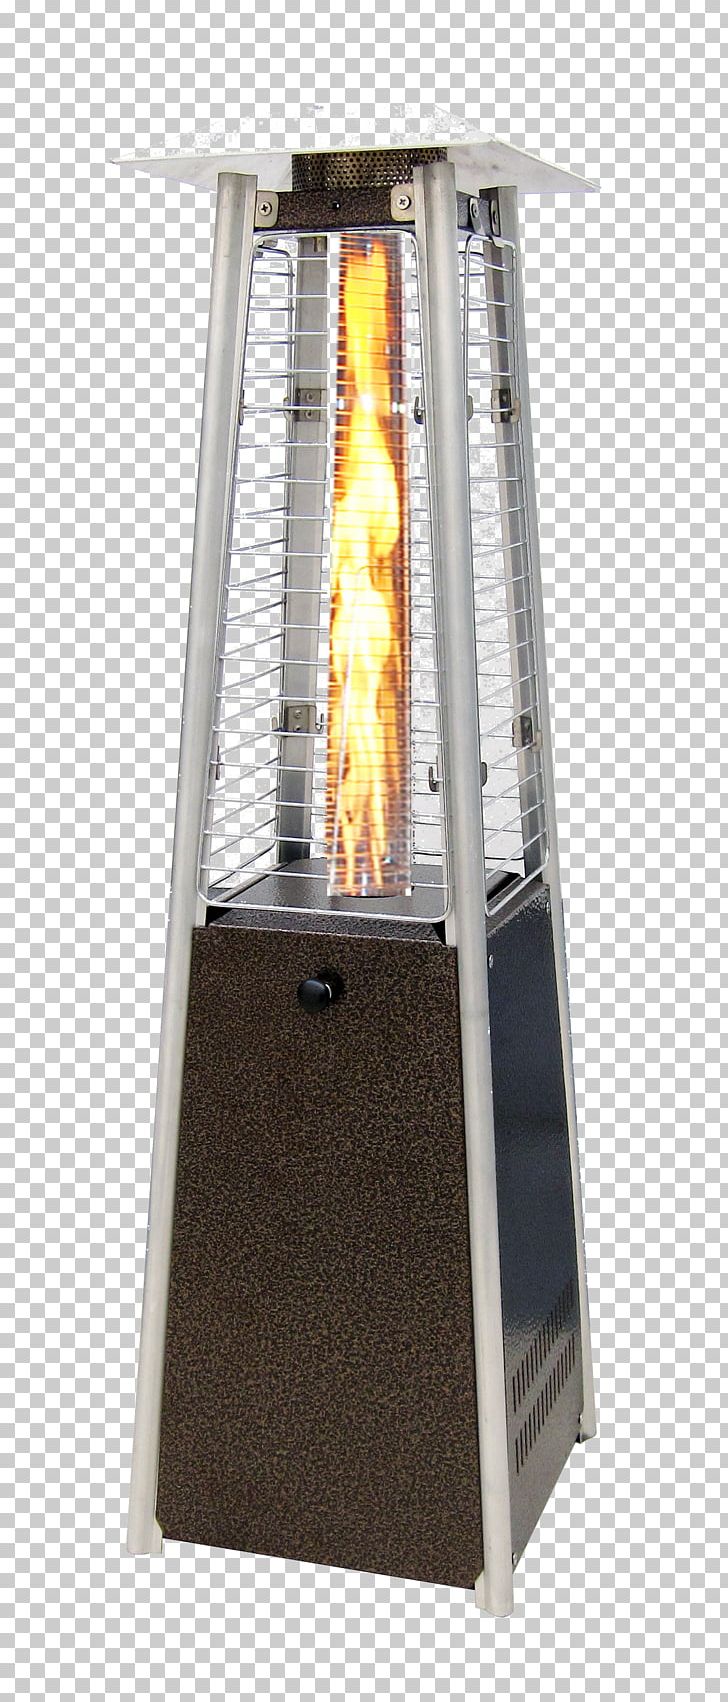 Patio Heaters Gas Heater Propane Natural Gas PNG, Clipart, British Thermal Unit, Decorative, Fire, Flame, Garden Free PNG Download